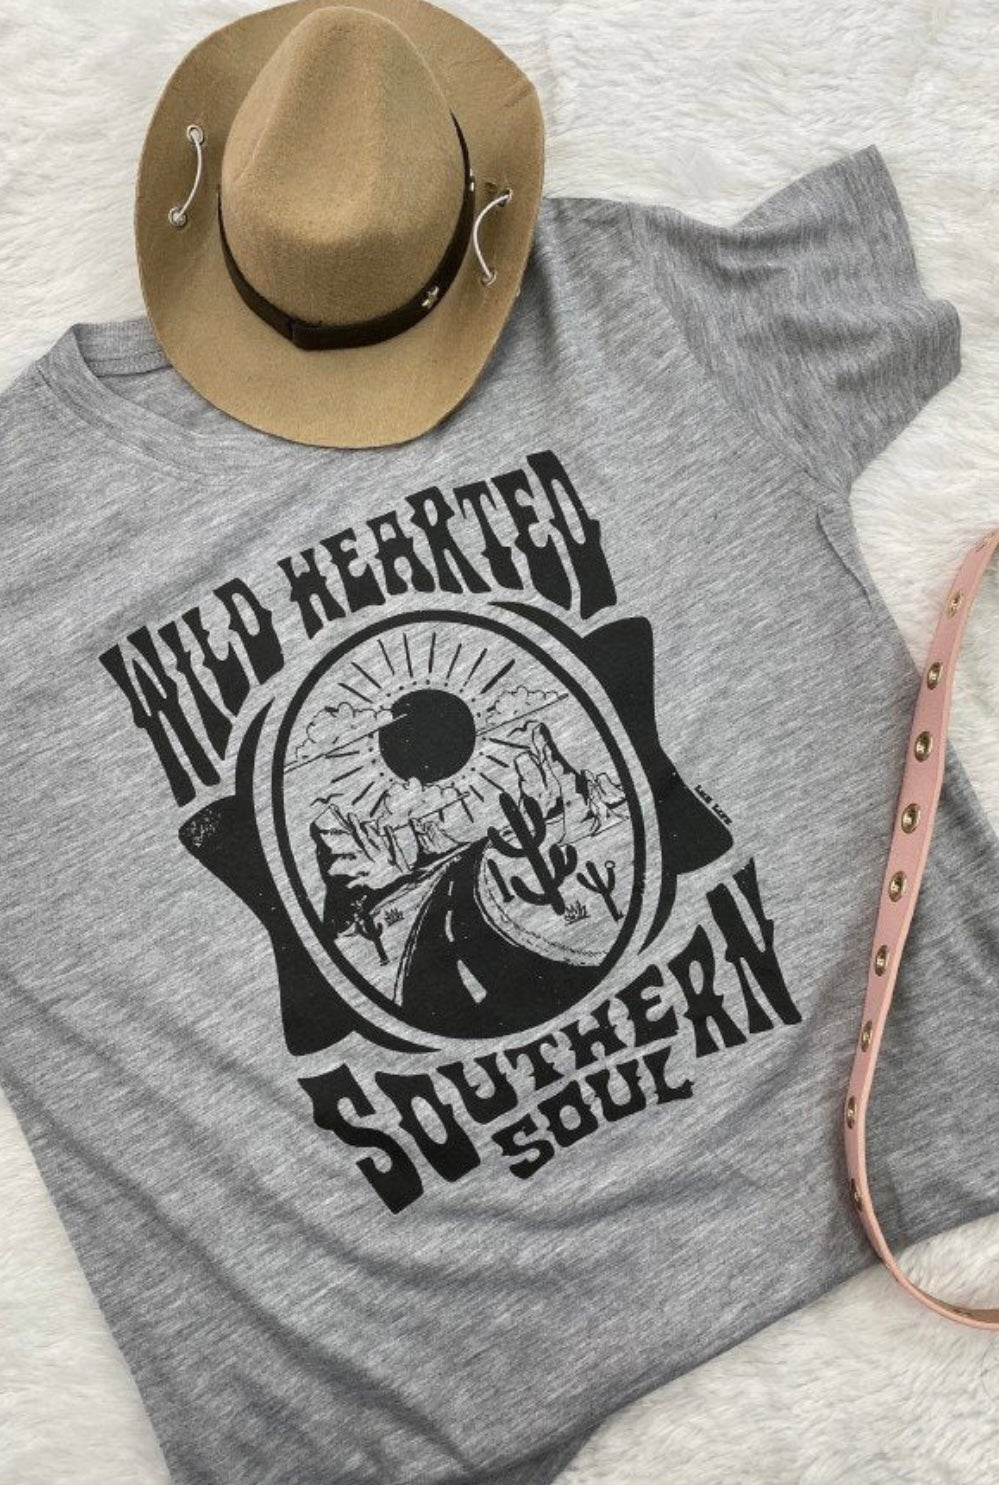 Wild Hearted Southern Soul Youth